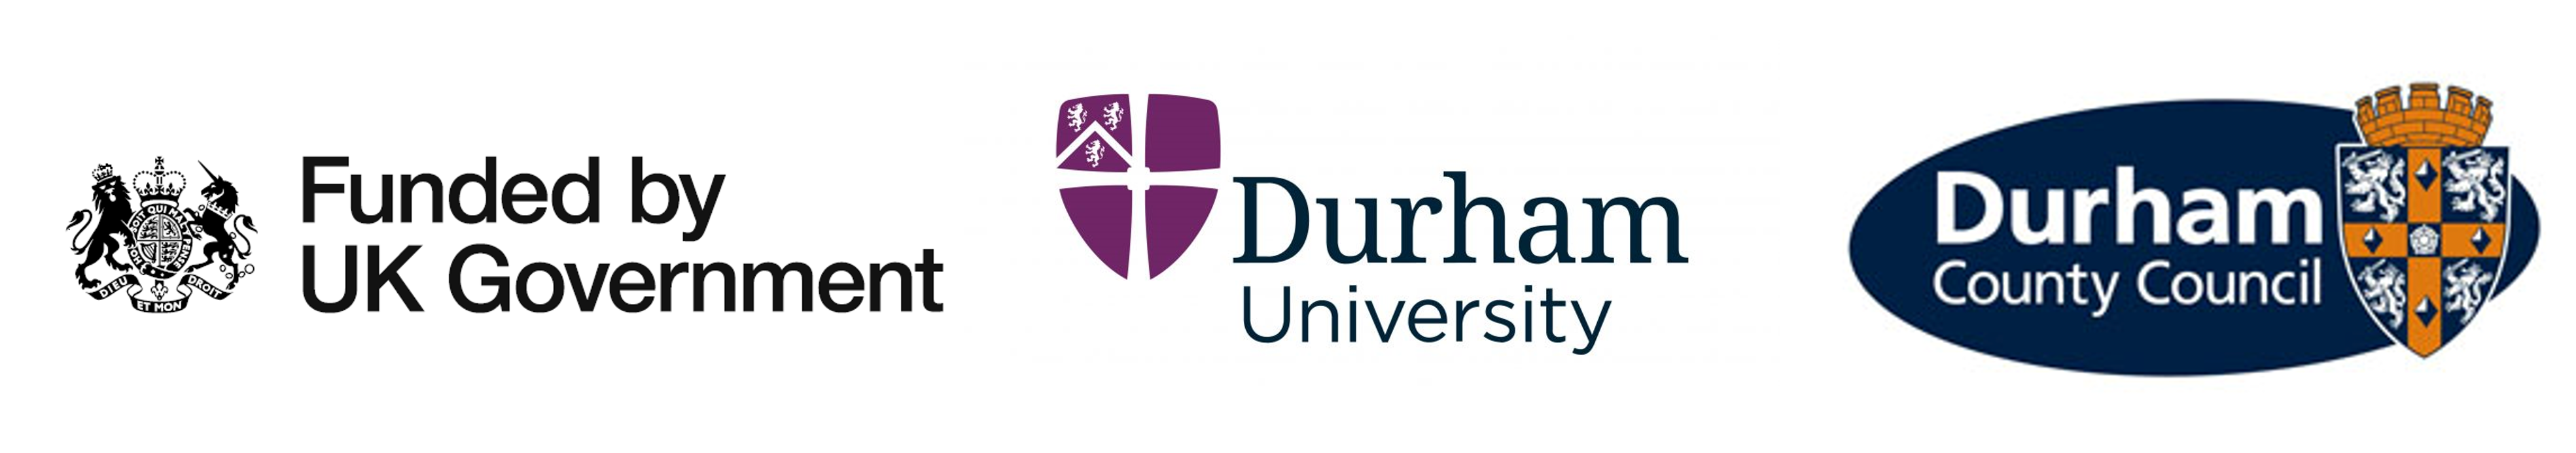 3 logos, Funded by UK Government, Durham University and Durham County Council